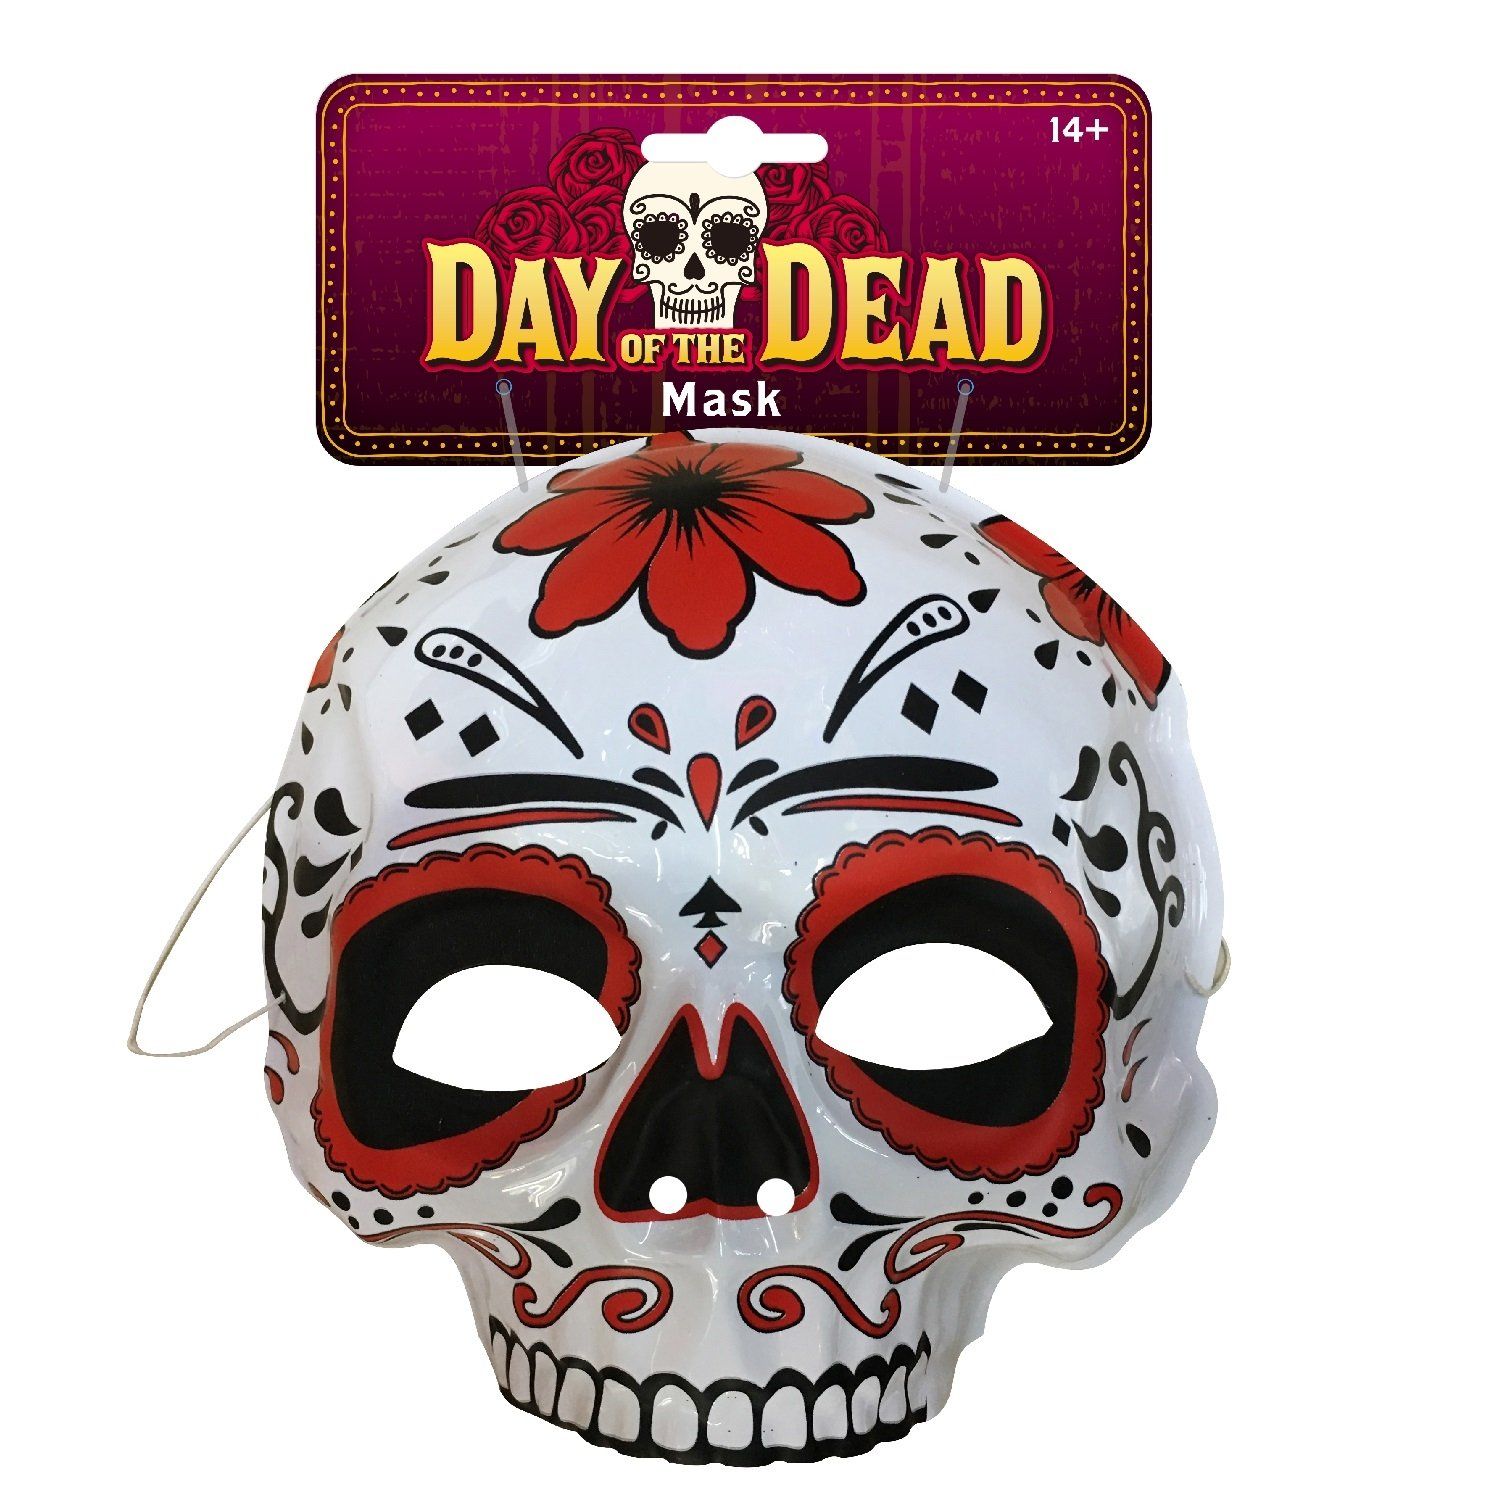 DAY OF THE DEAD BLISTER HALF MASK